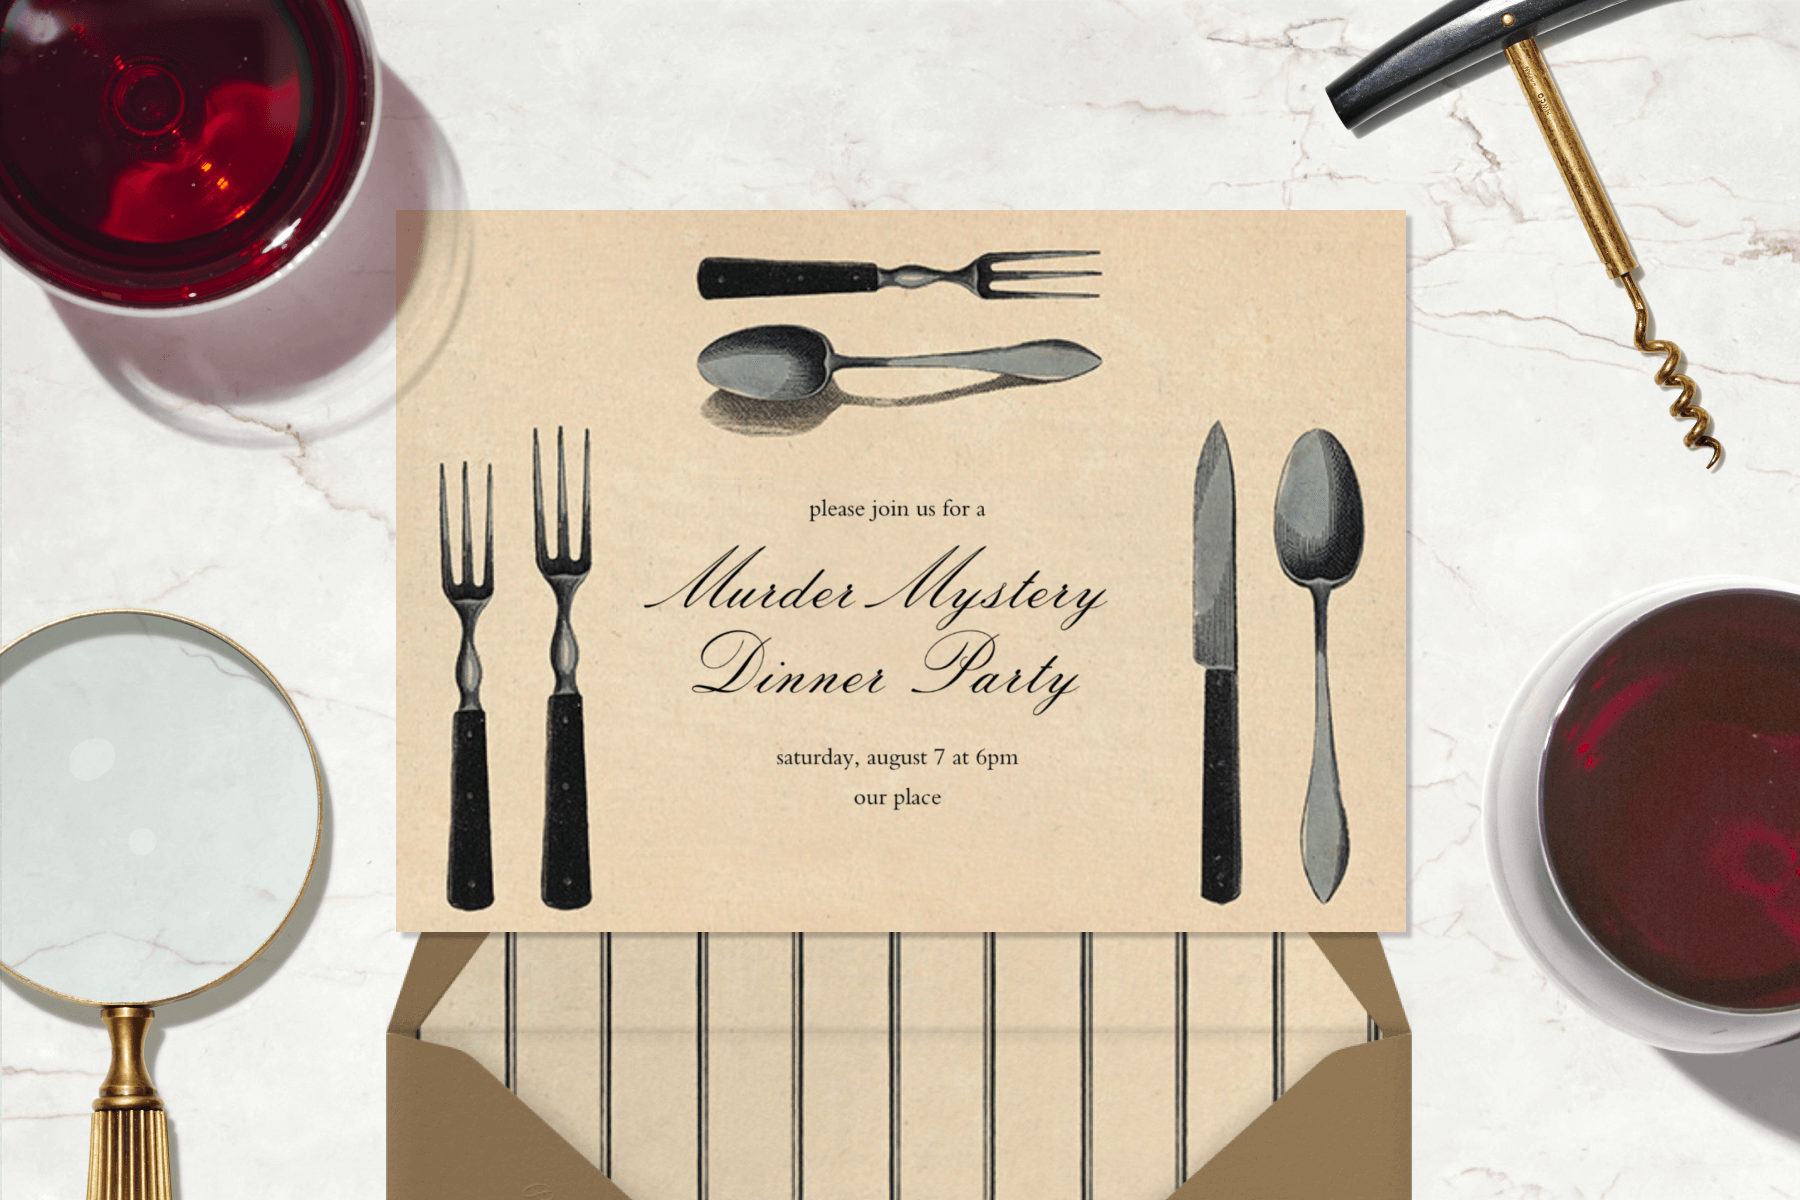 An invitation with ominous looking silverware on a table with wine, a corkscrew, and a magnifying glass.